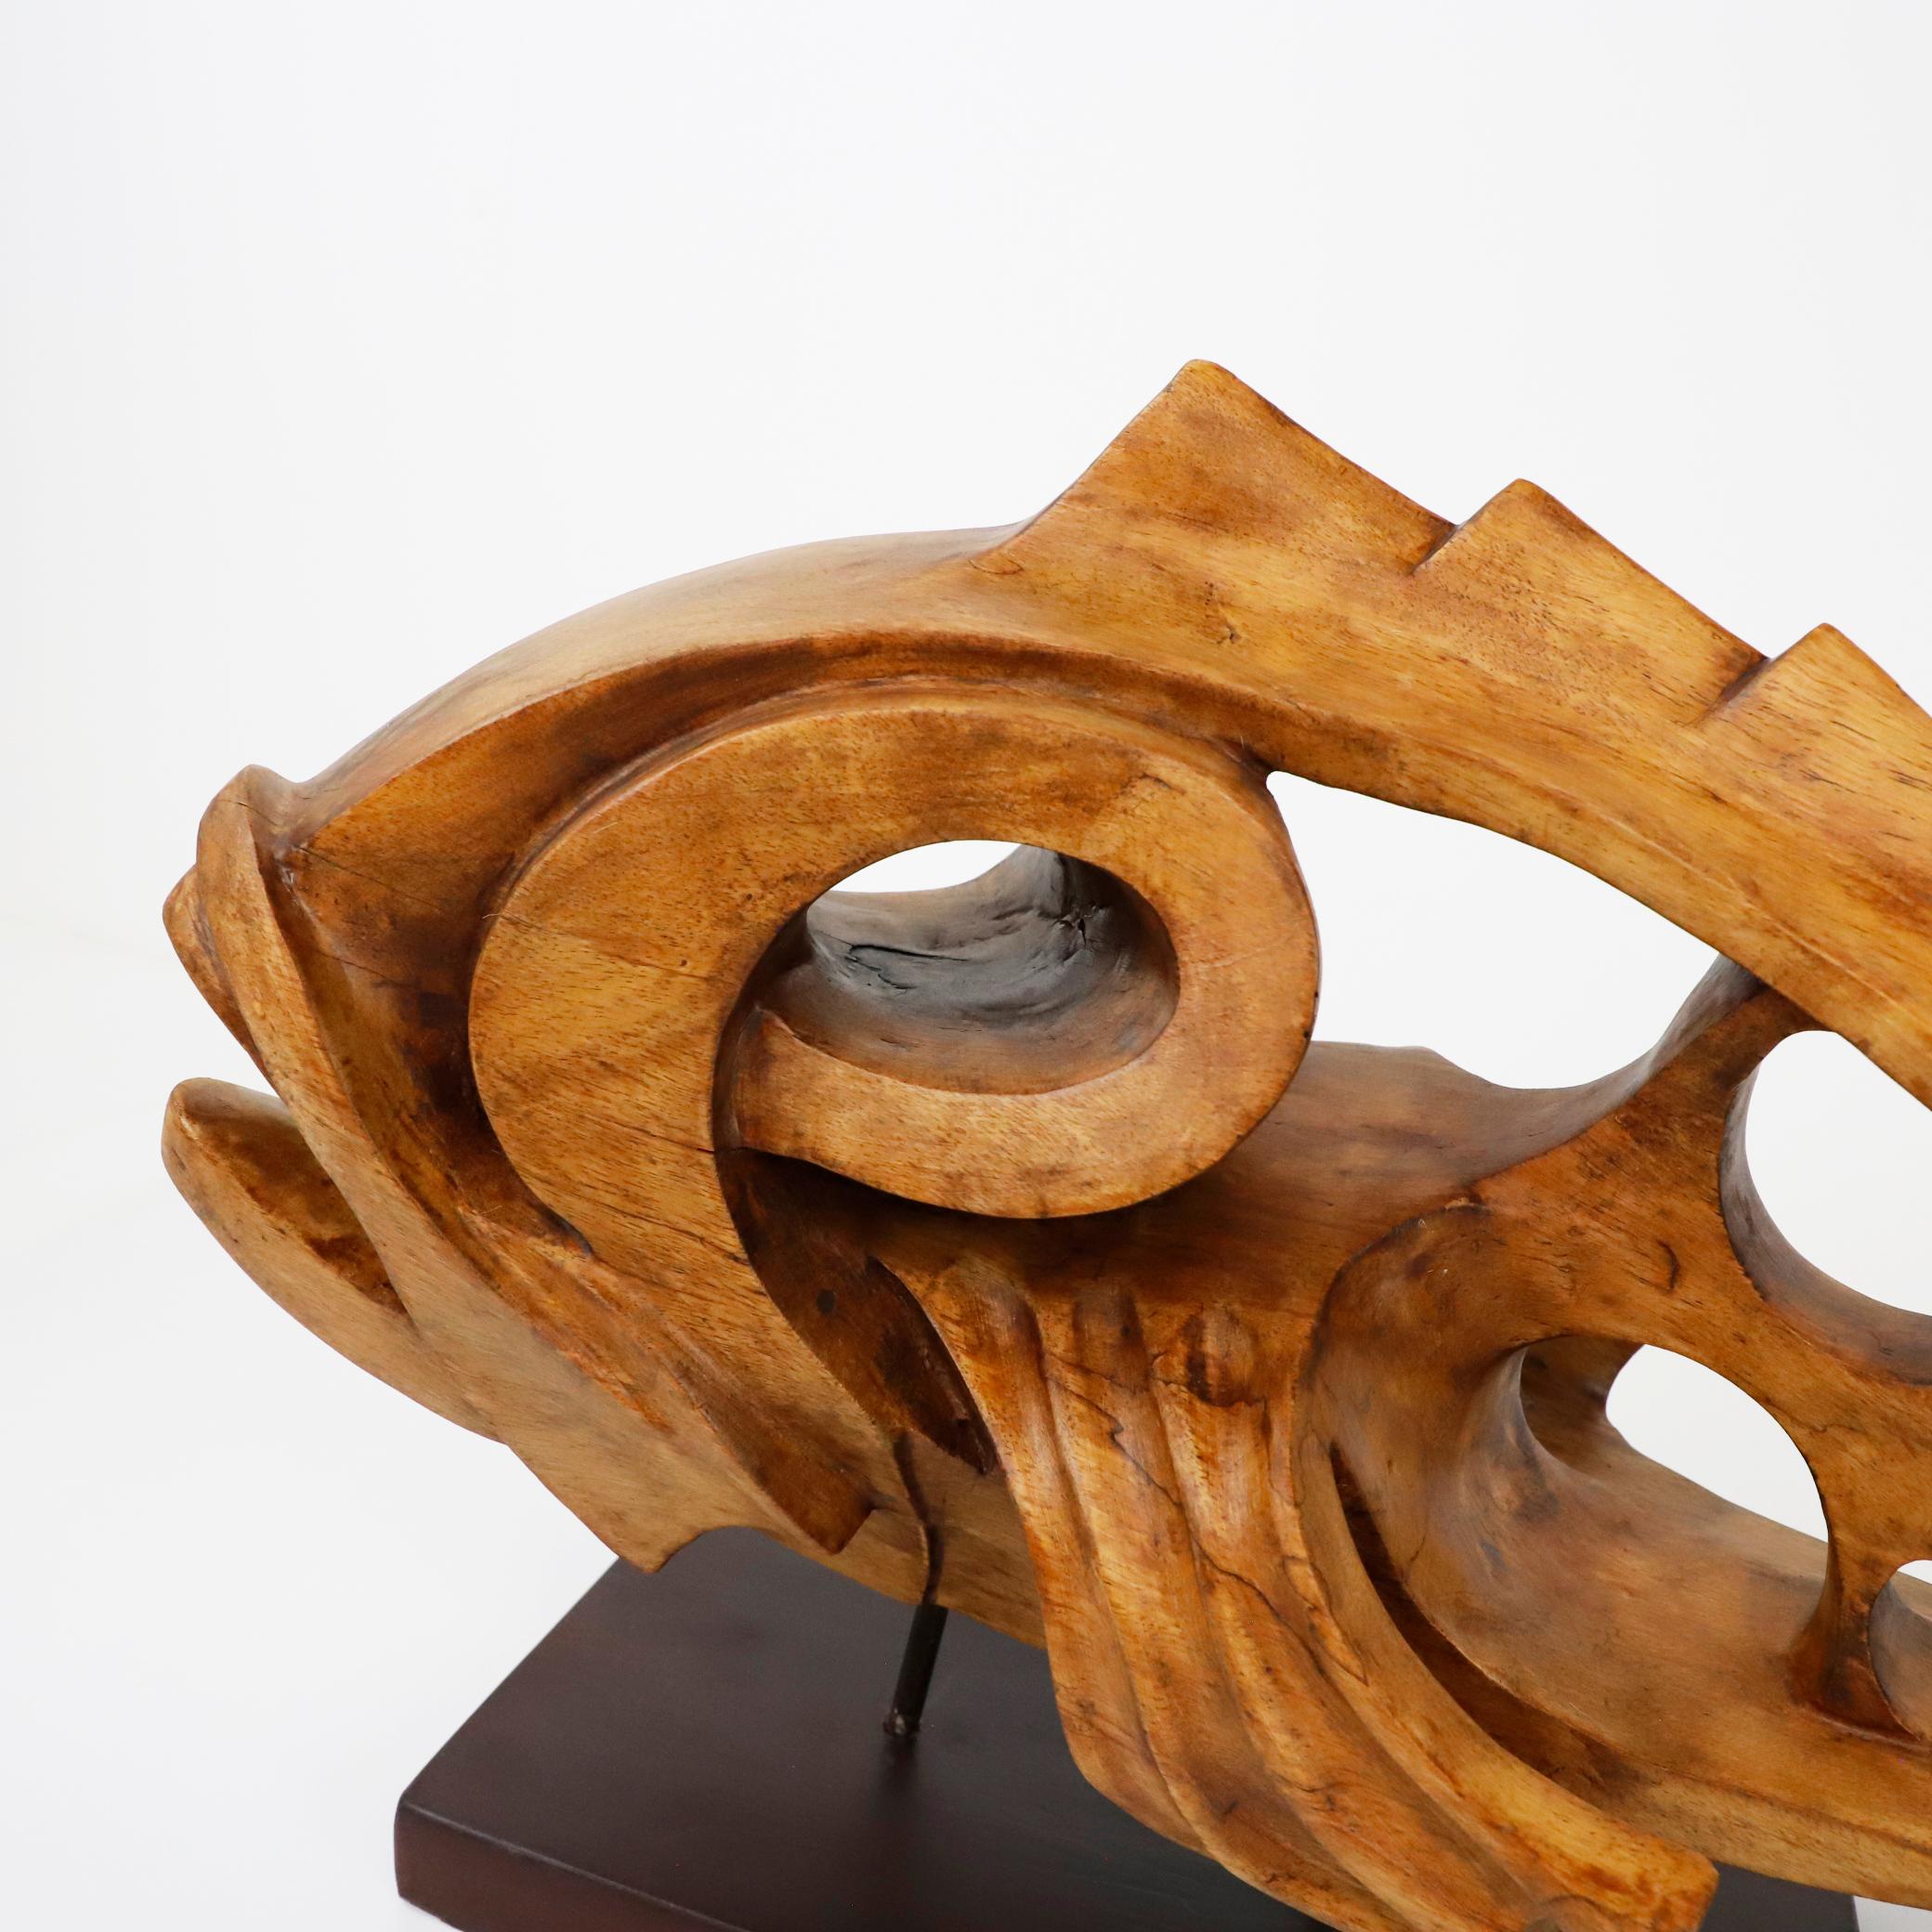 Circa 1960. We offer this mid century fish sculpture in tropical carved wood.